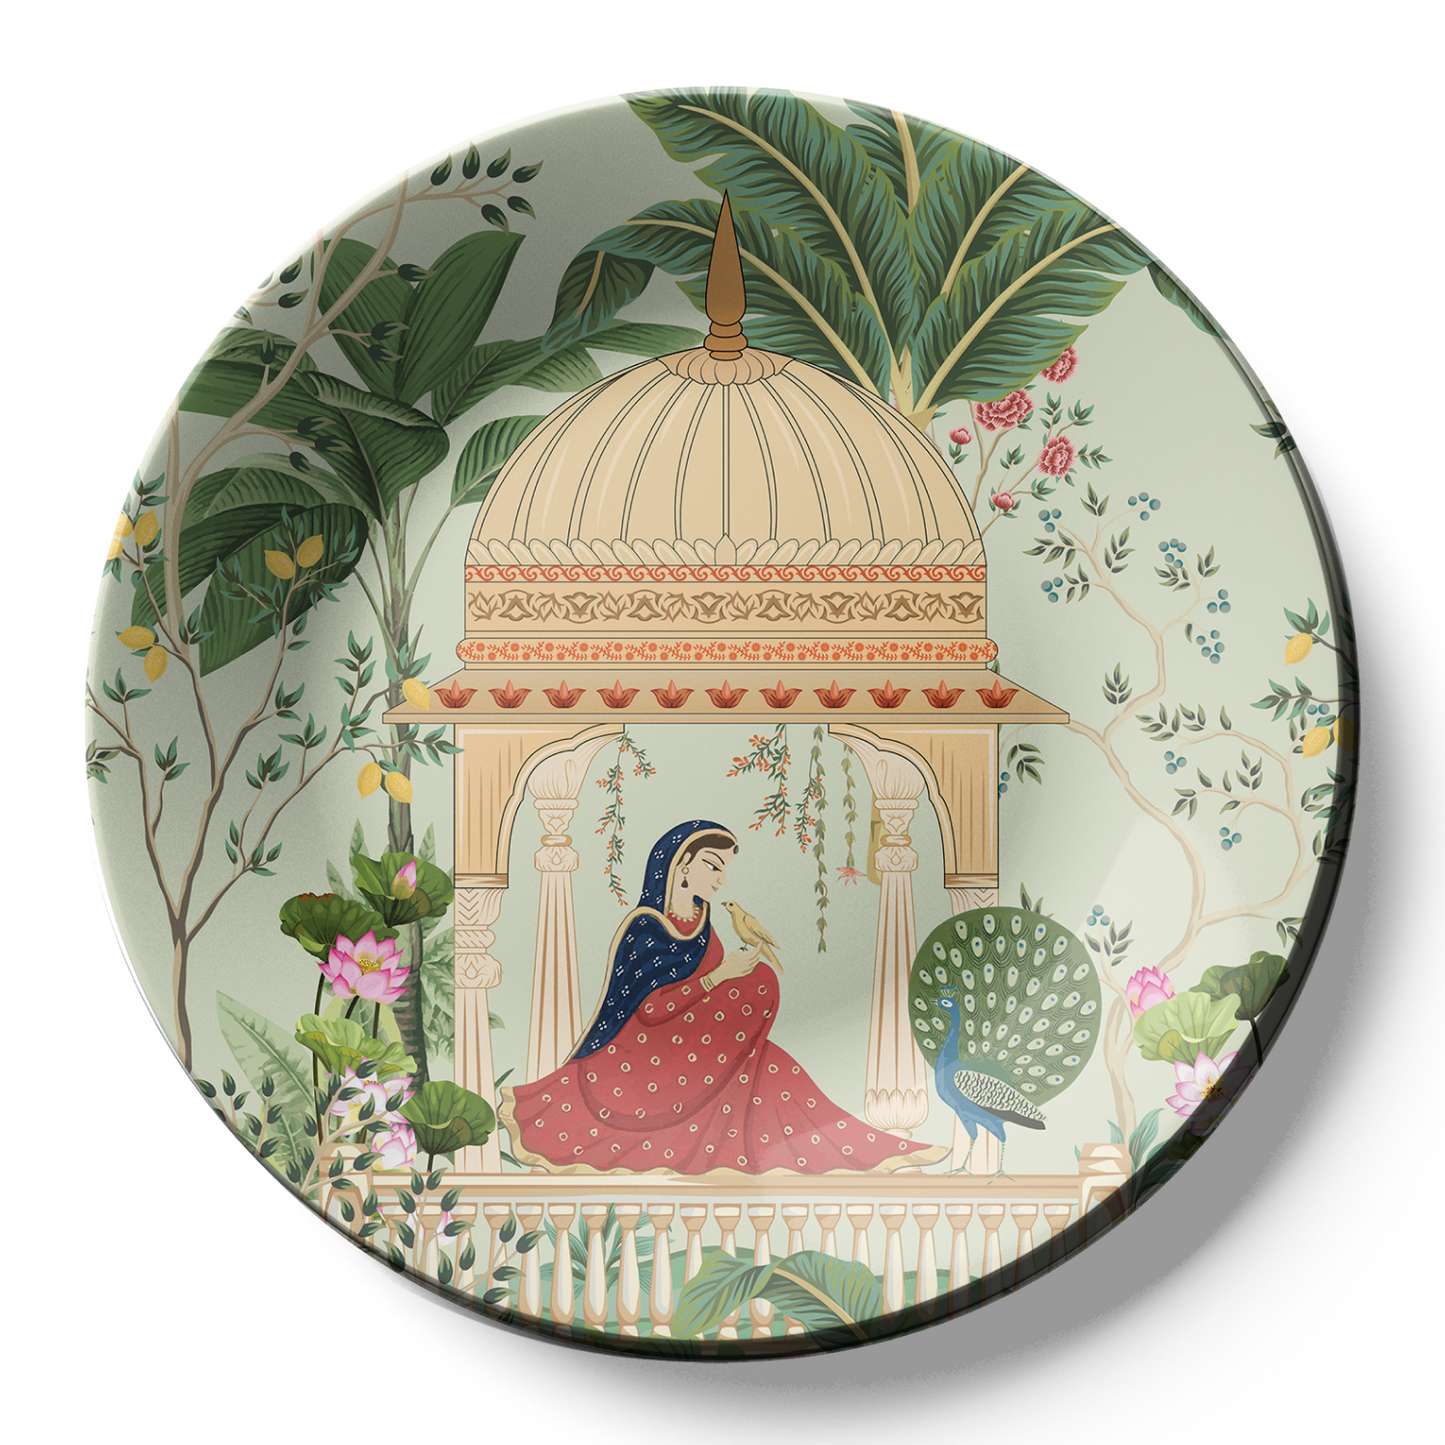 beautiful  Woman Sitting in Cabana unique Ceramic  plate design on wall